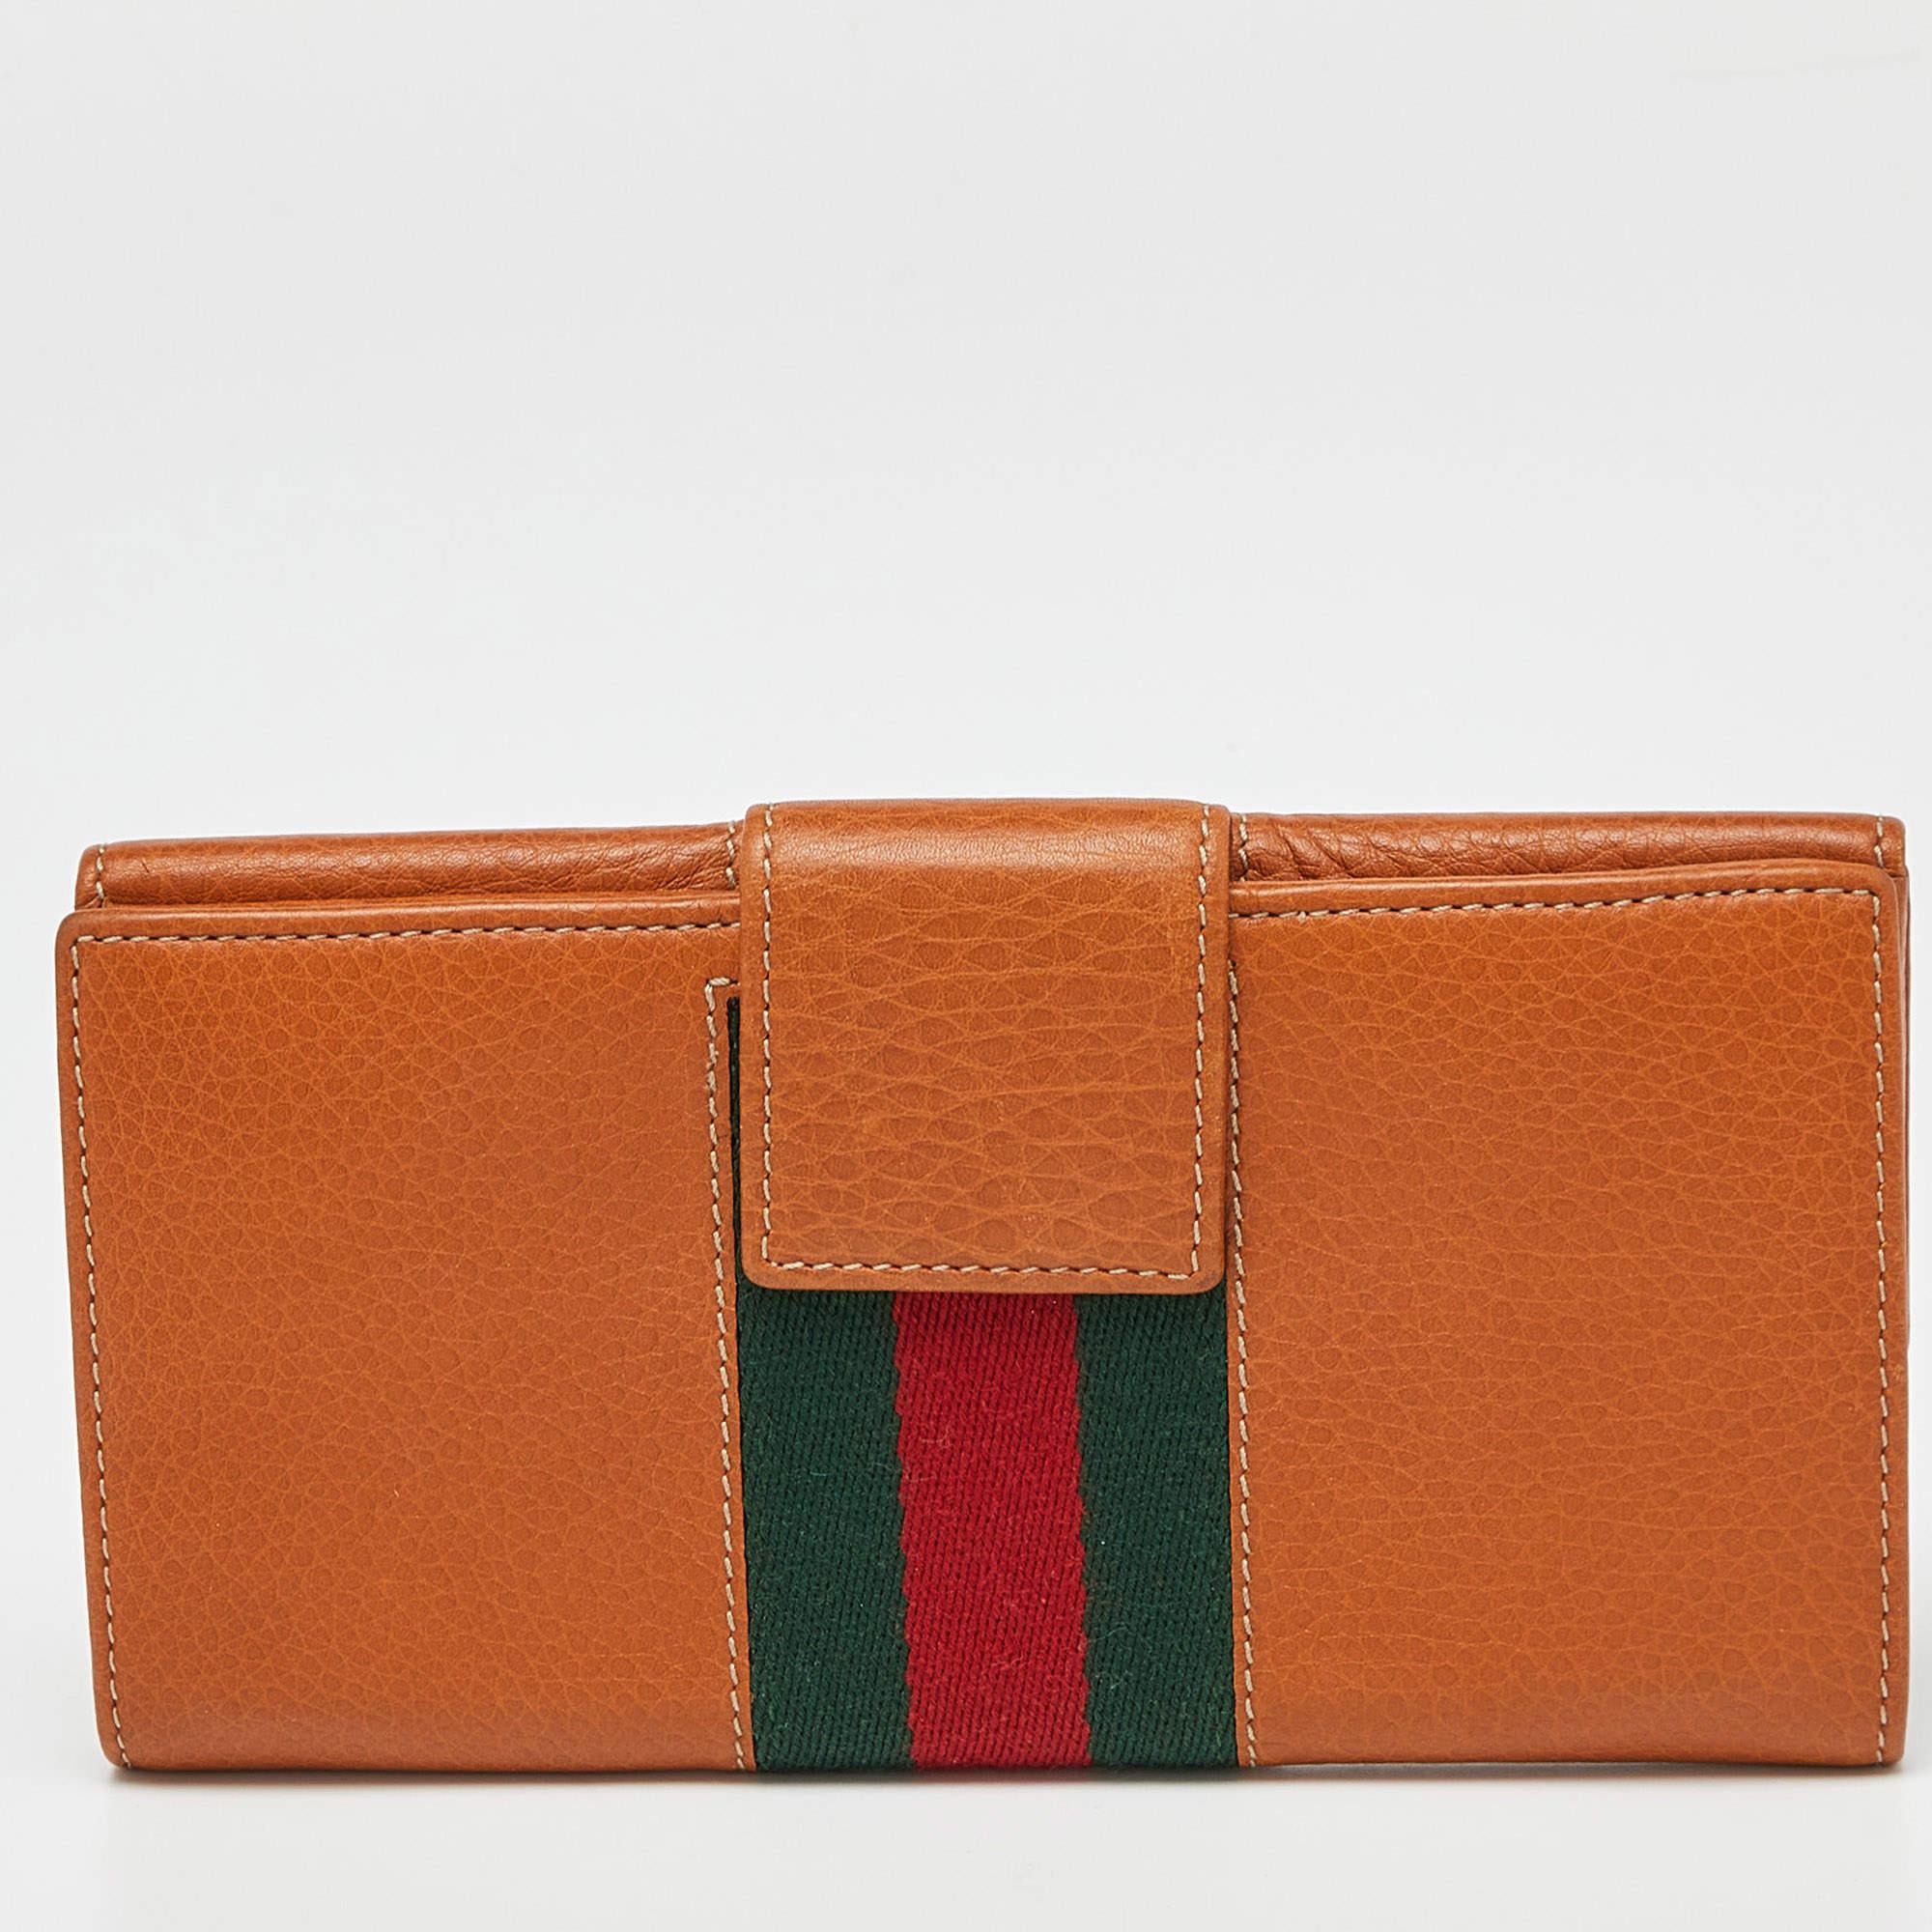 This continental wallet from Gucci is totally captivating! The tan hue and luxurious leather exterior lend a glorious touch to this versatile piece. The leather interior having multiple slots ensures enough space for your cards and vital